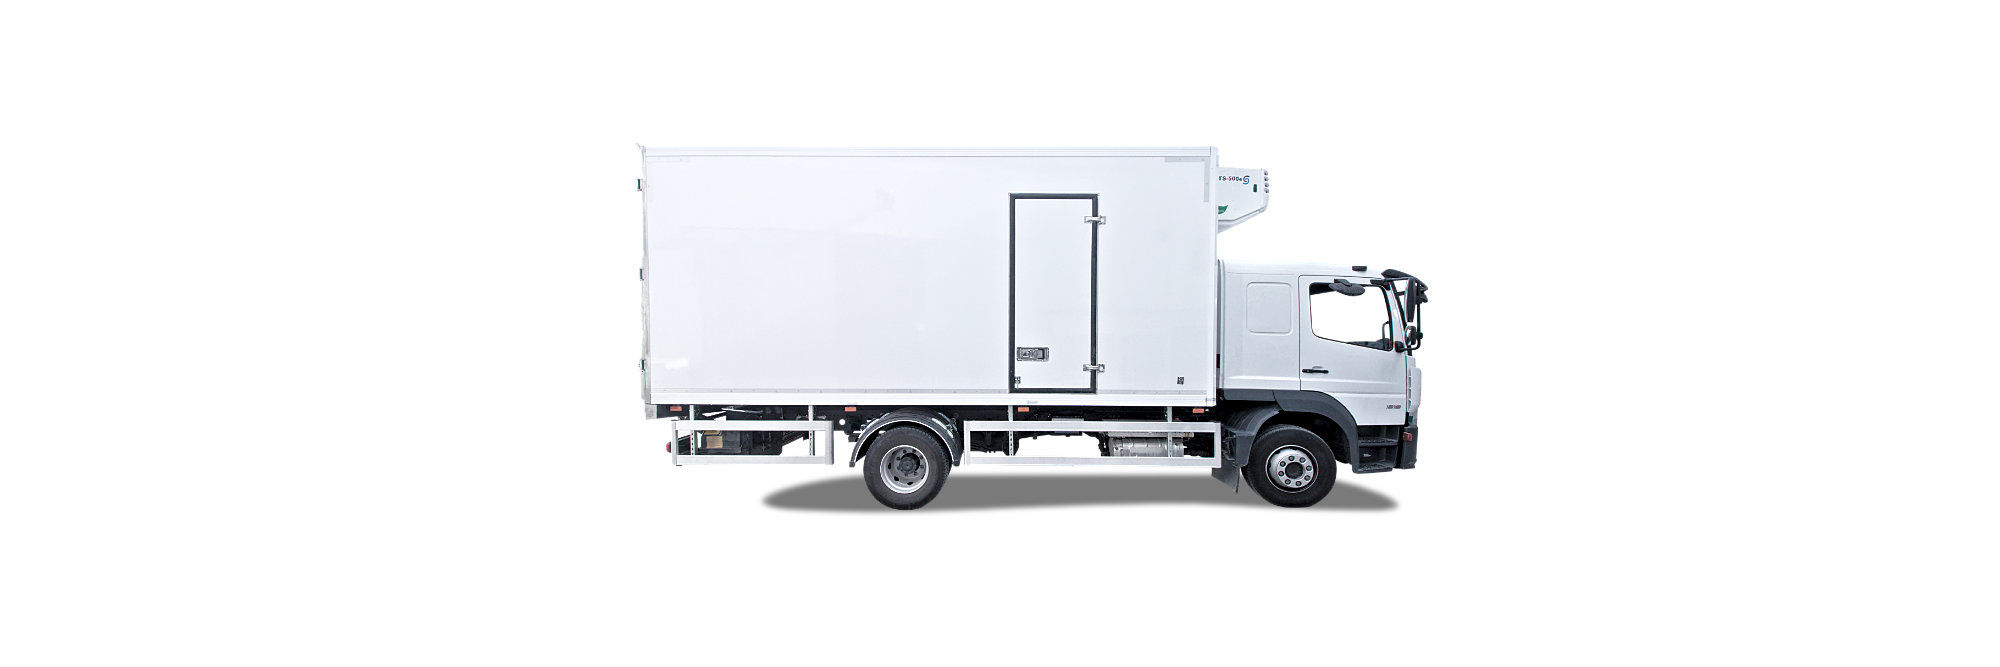 Decopan Commercial Vehicle FRP GRP laminates for meat and fresh food trailer, truck, van body manufacturing